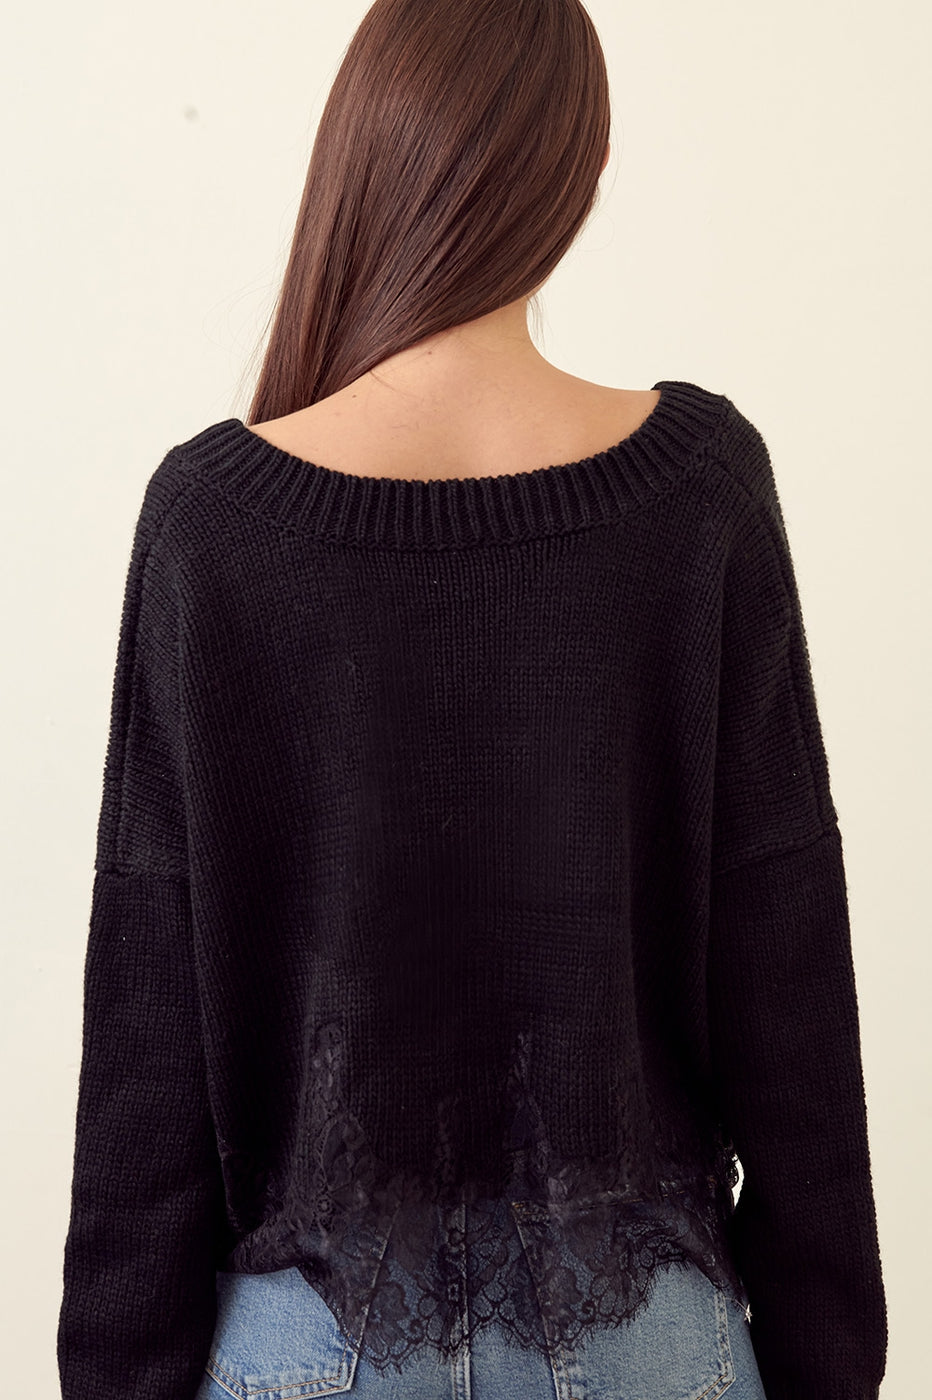 Knit sweater with lace trim